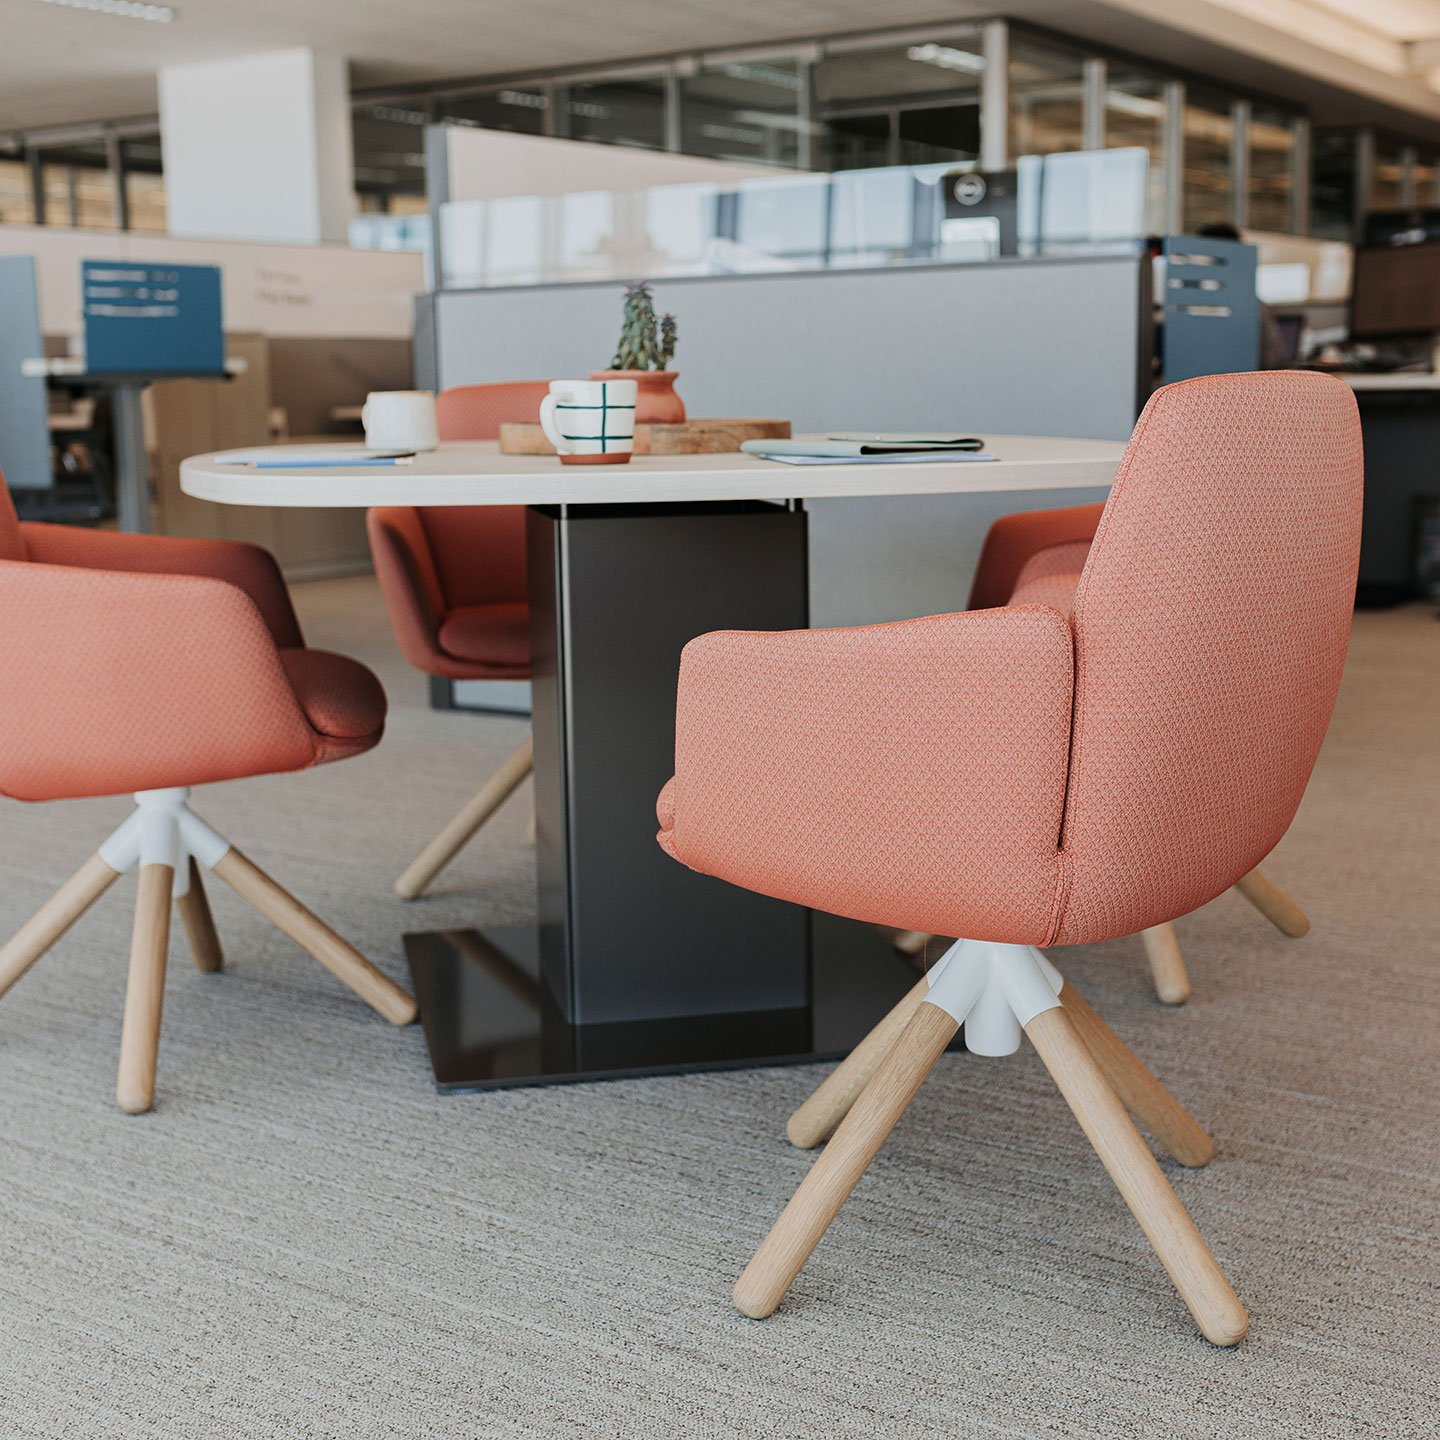 Haworth Planes Conference Table in a open office space with chairs for collaboration 